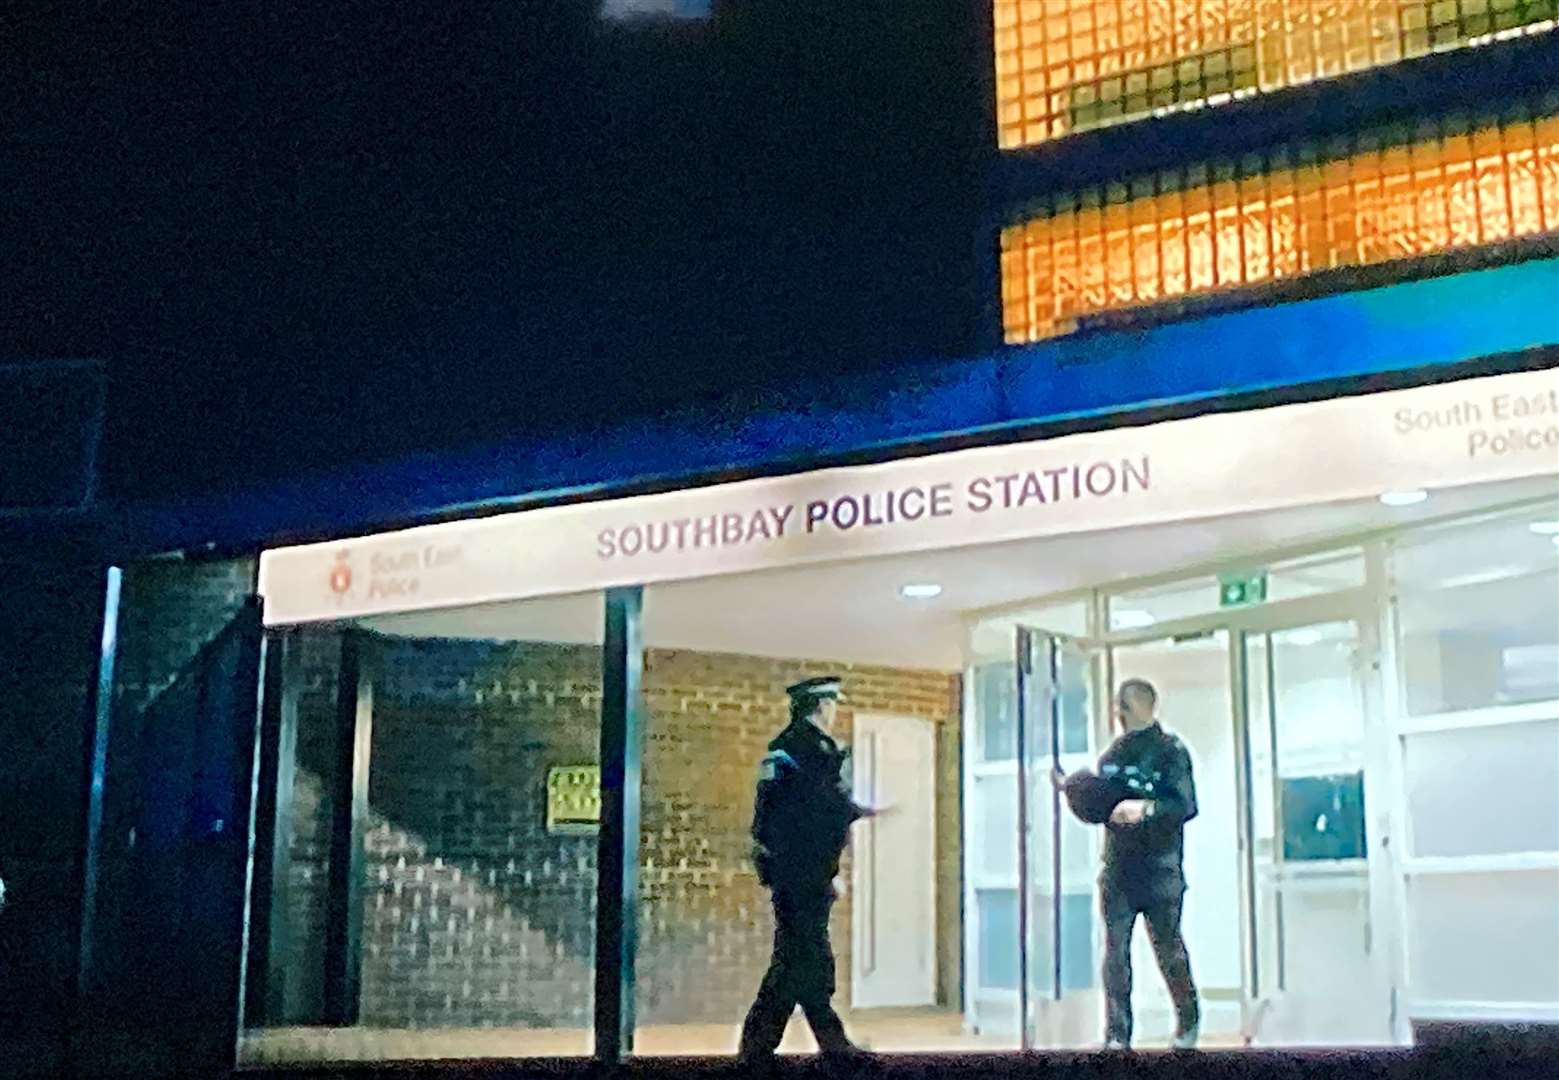 Southbay Police Station in Silent Witness. Picture: BBC